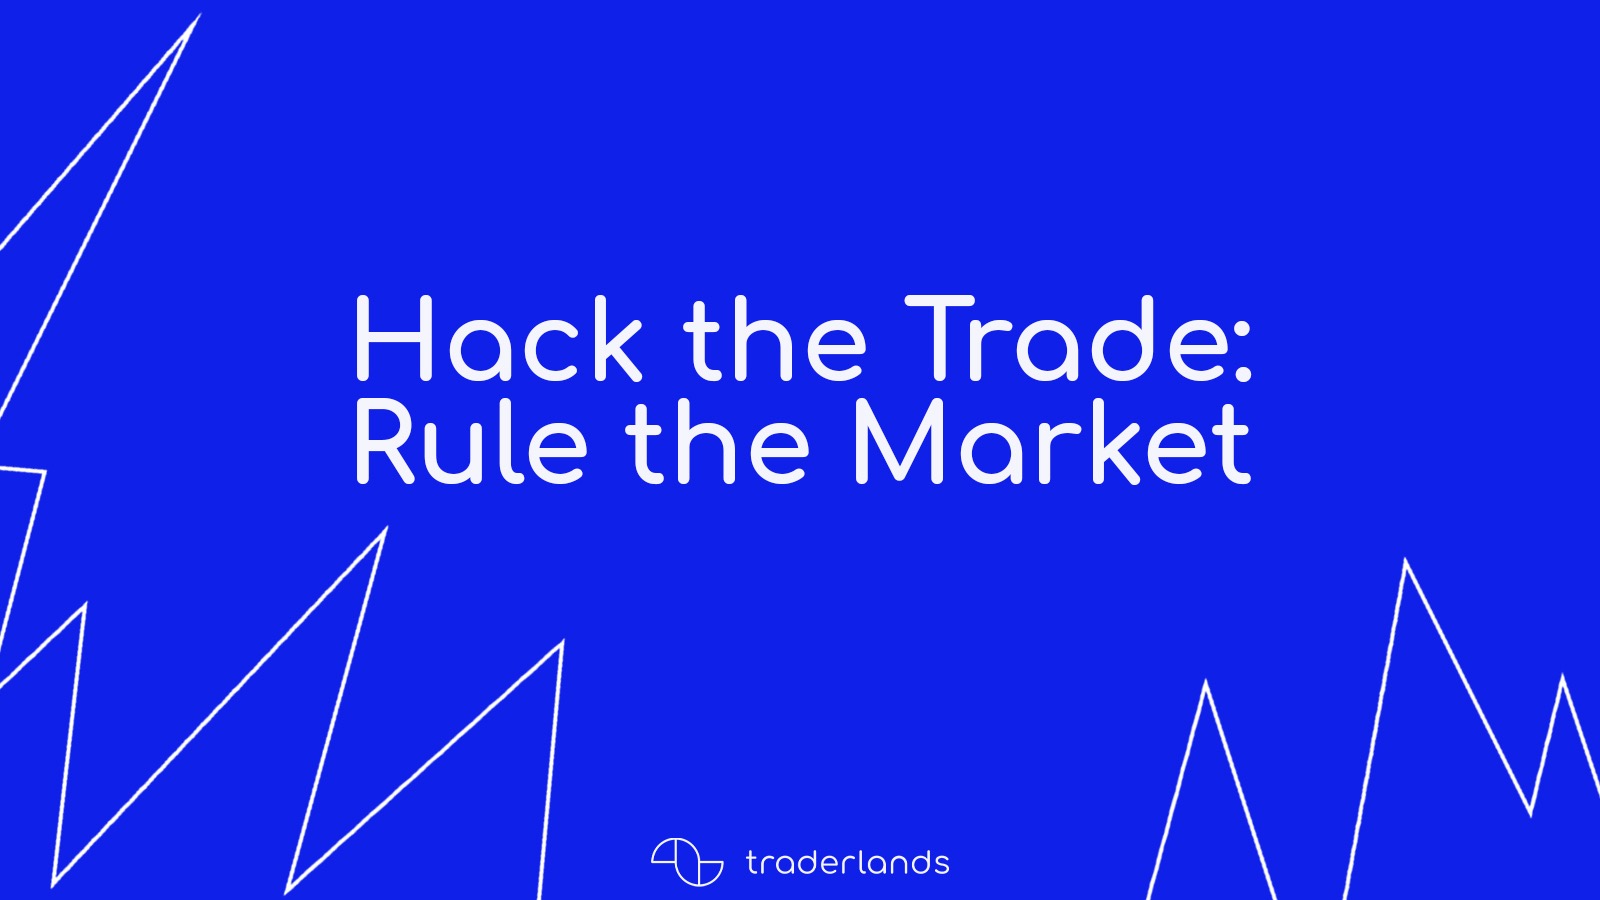 Hack the Trade: Rule the Market